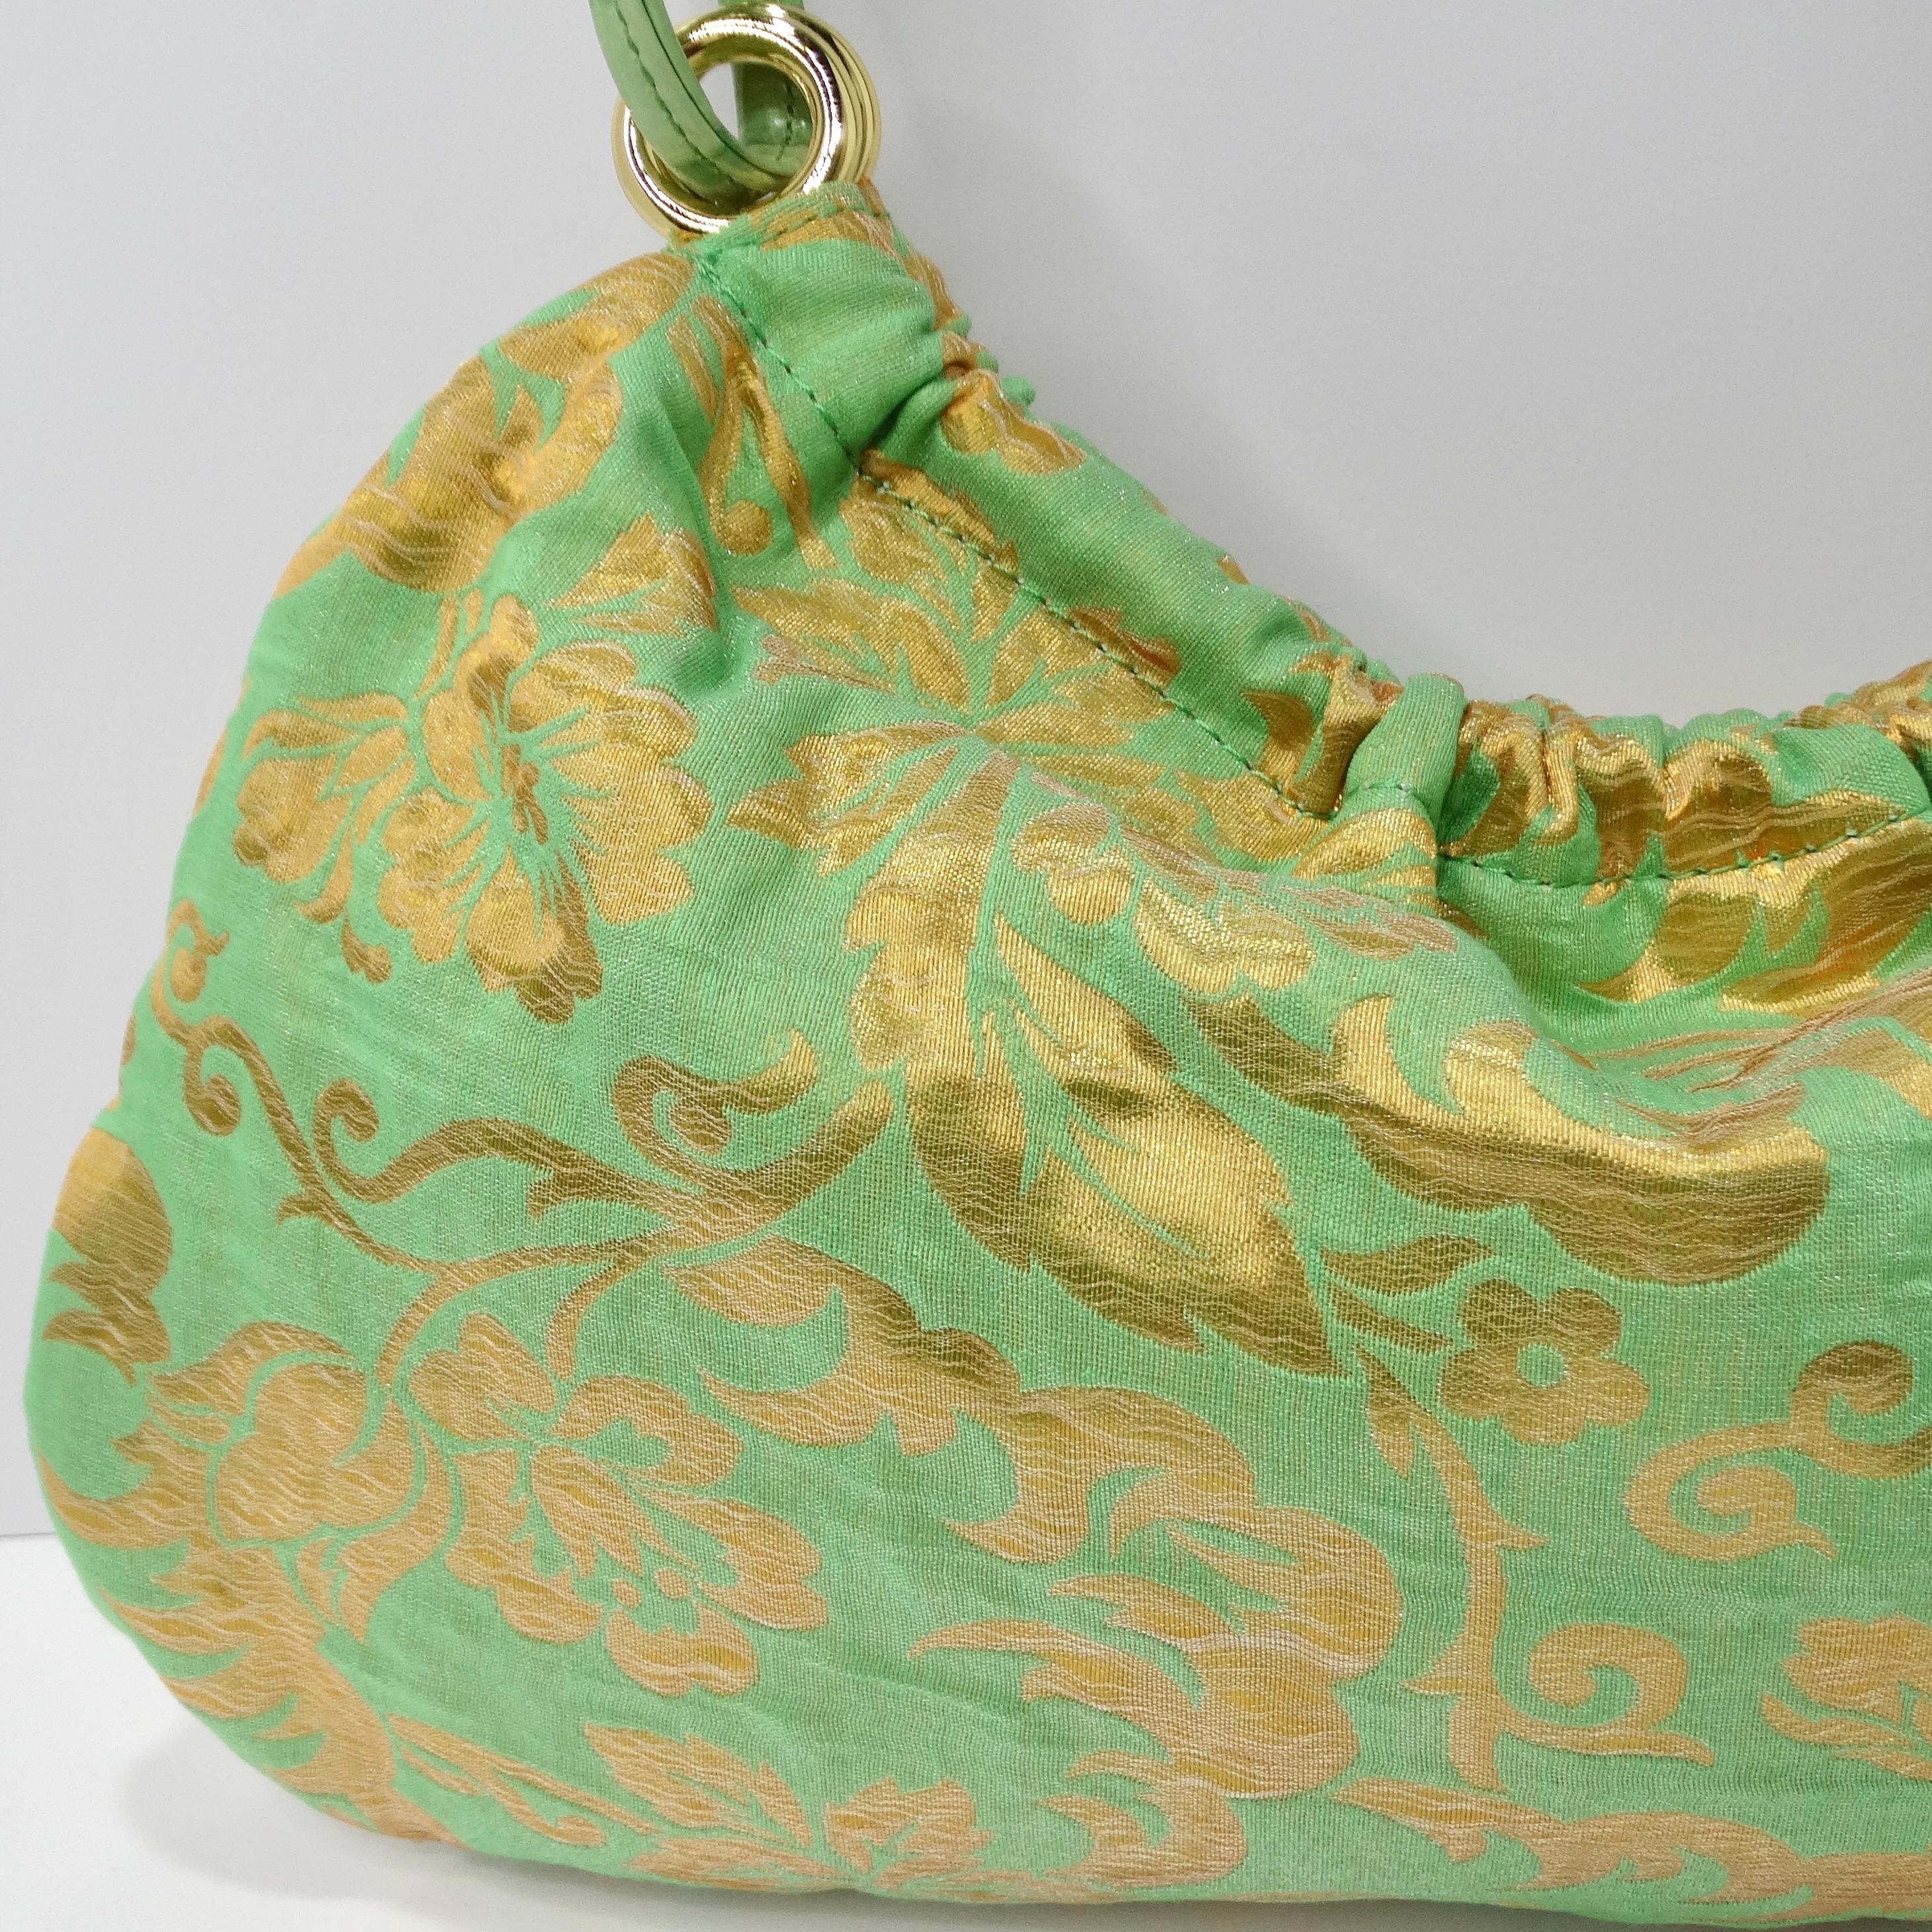 Introducing the Kate Spade Green Floral Shoulder Bag, a vibrant and playful accessory that adds a touch of fun to any ensemble. This bright green shoulder bag features metallic gold floral detailing, adding a whimsical and eye-catching element to